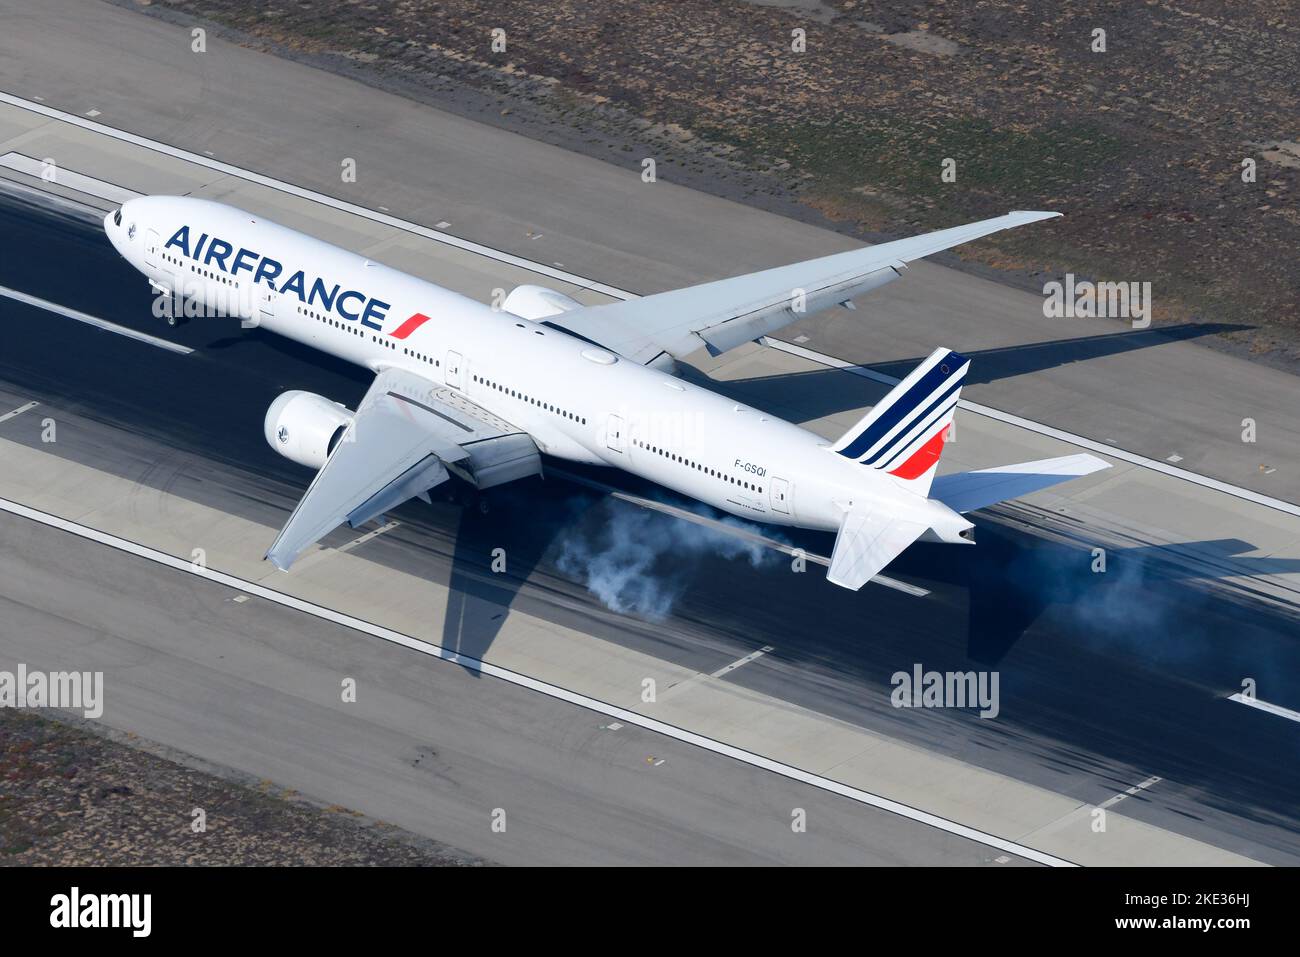 Air France Boeing 777 aircraft landing. Airplane of french airline and 777-300ER model. Air France plane F-GSQI. Widebody airliner. Stock Photo